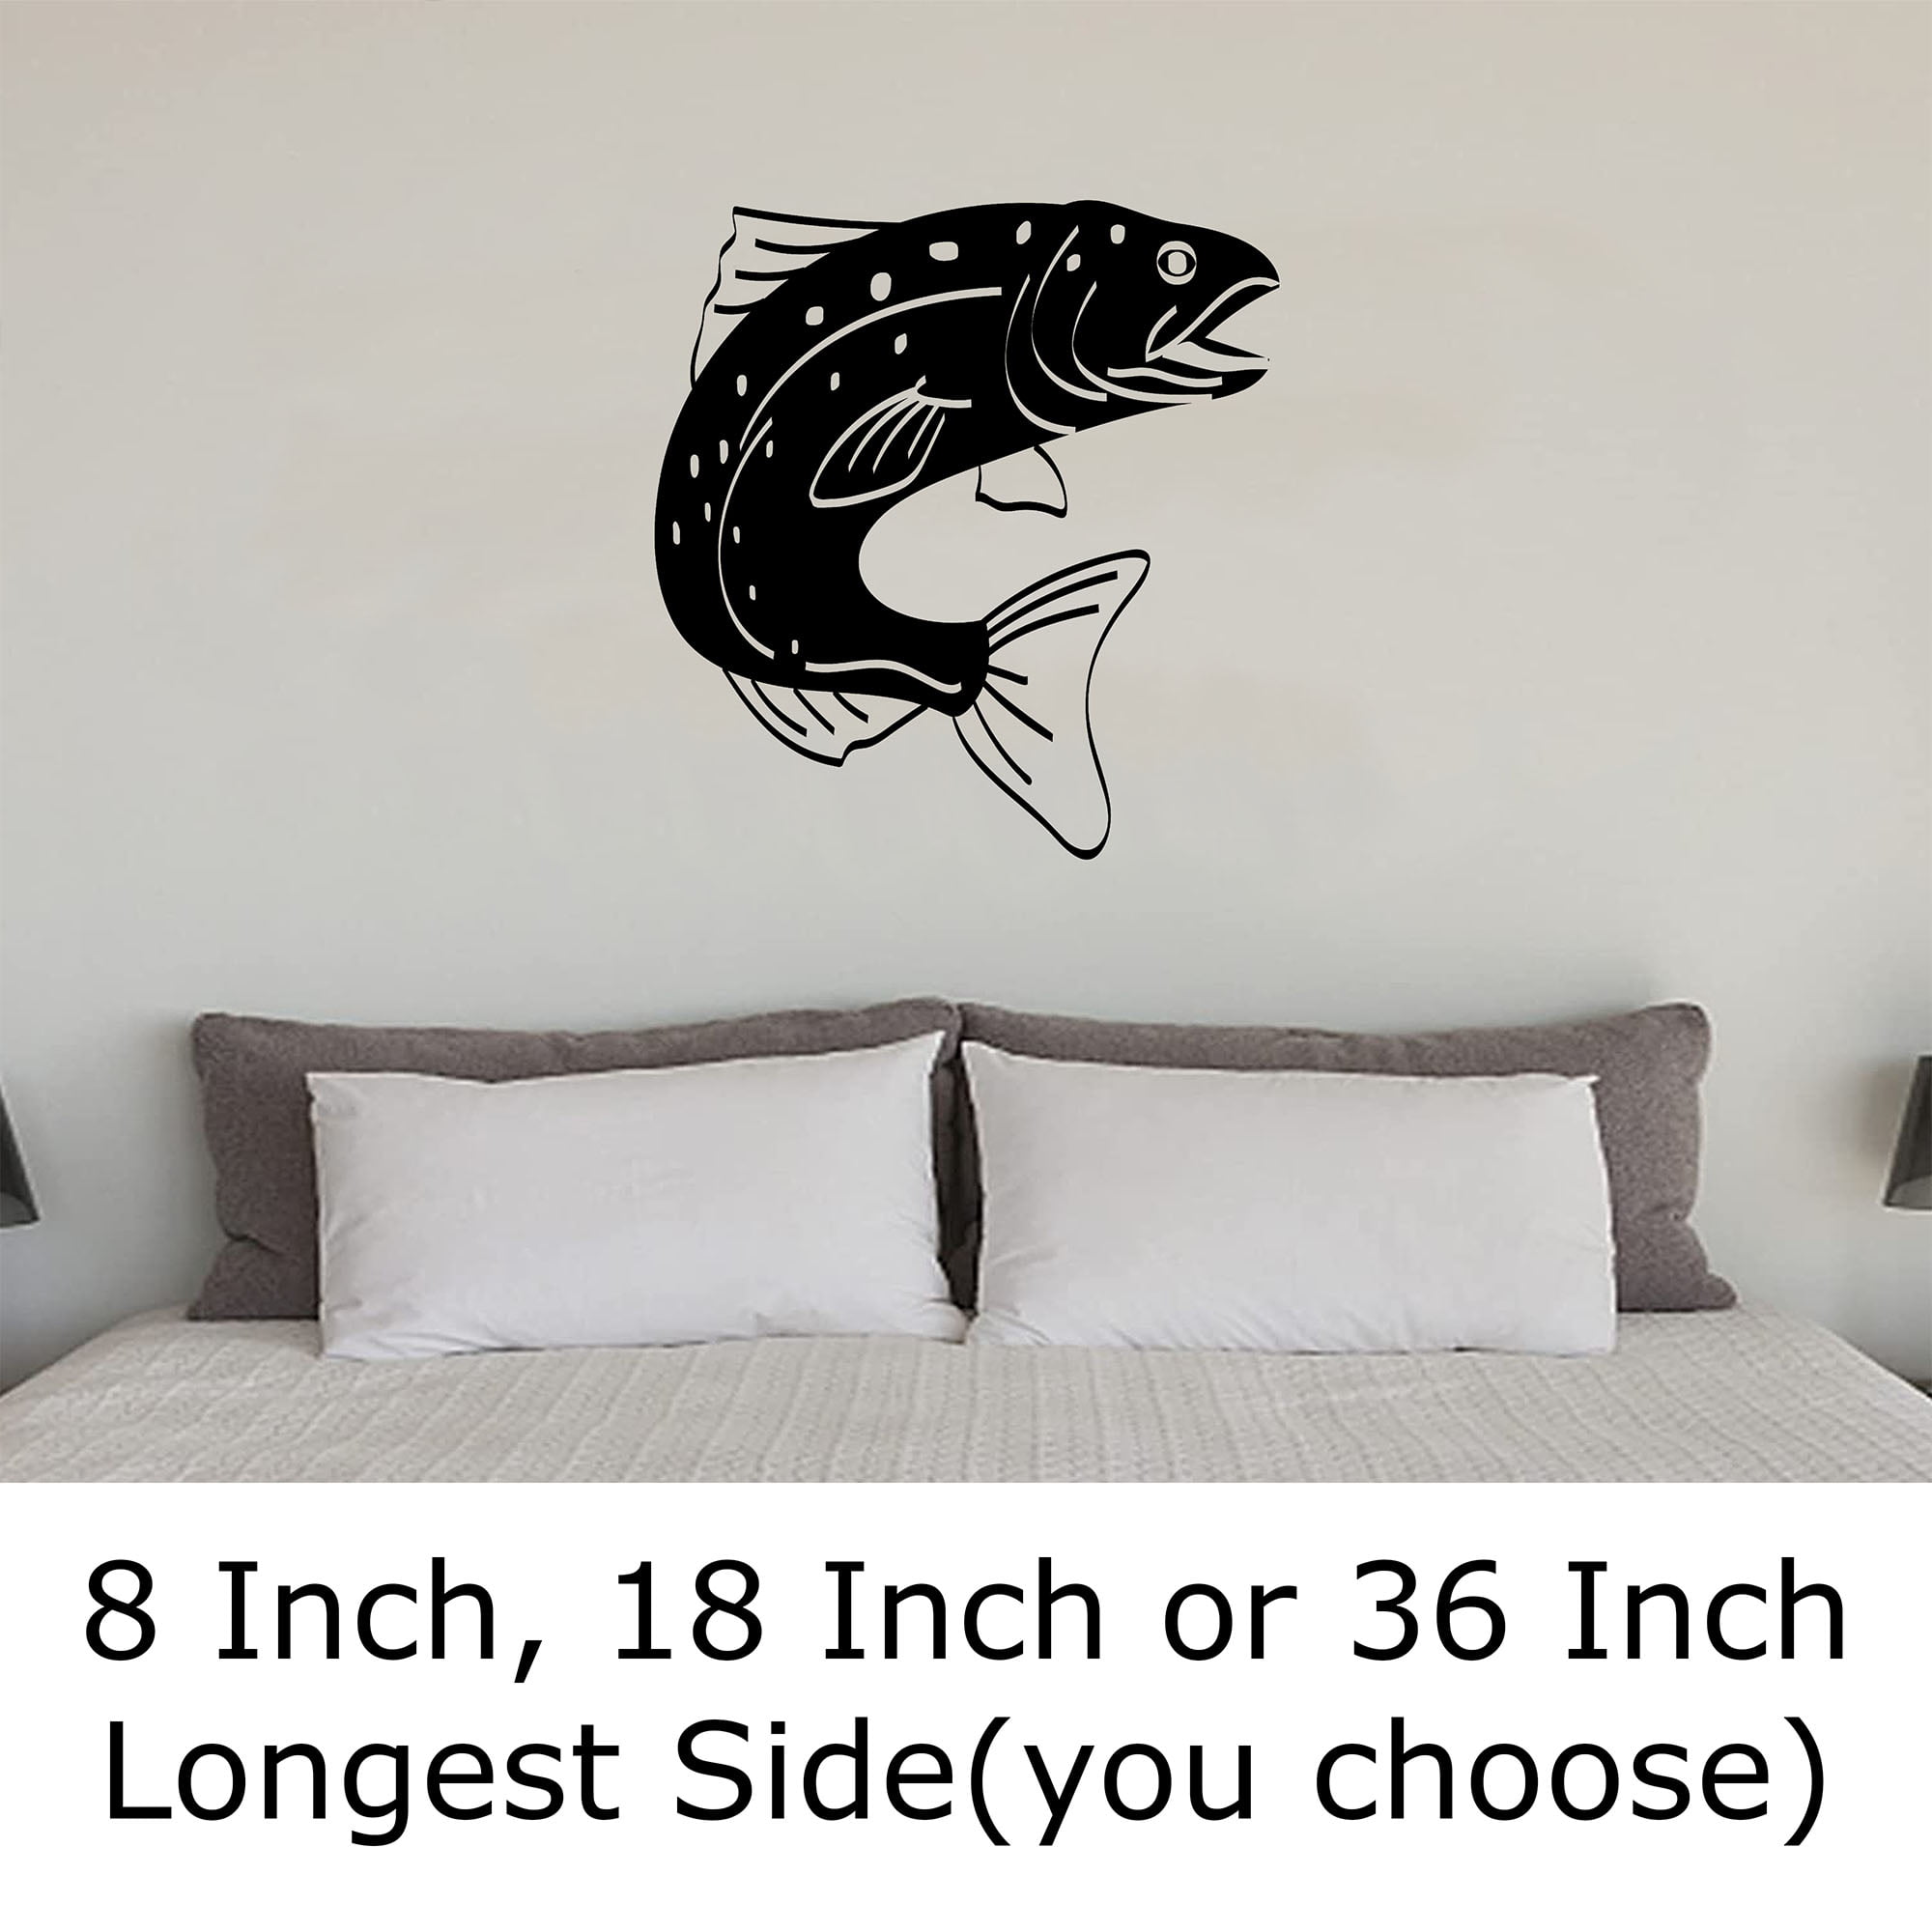 Bass Fish Outline Fishing Outdoors Activates Hobbies Wall Decals for Walls  Peel and Stick wall art murals Black Small 8 Inch 